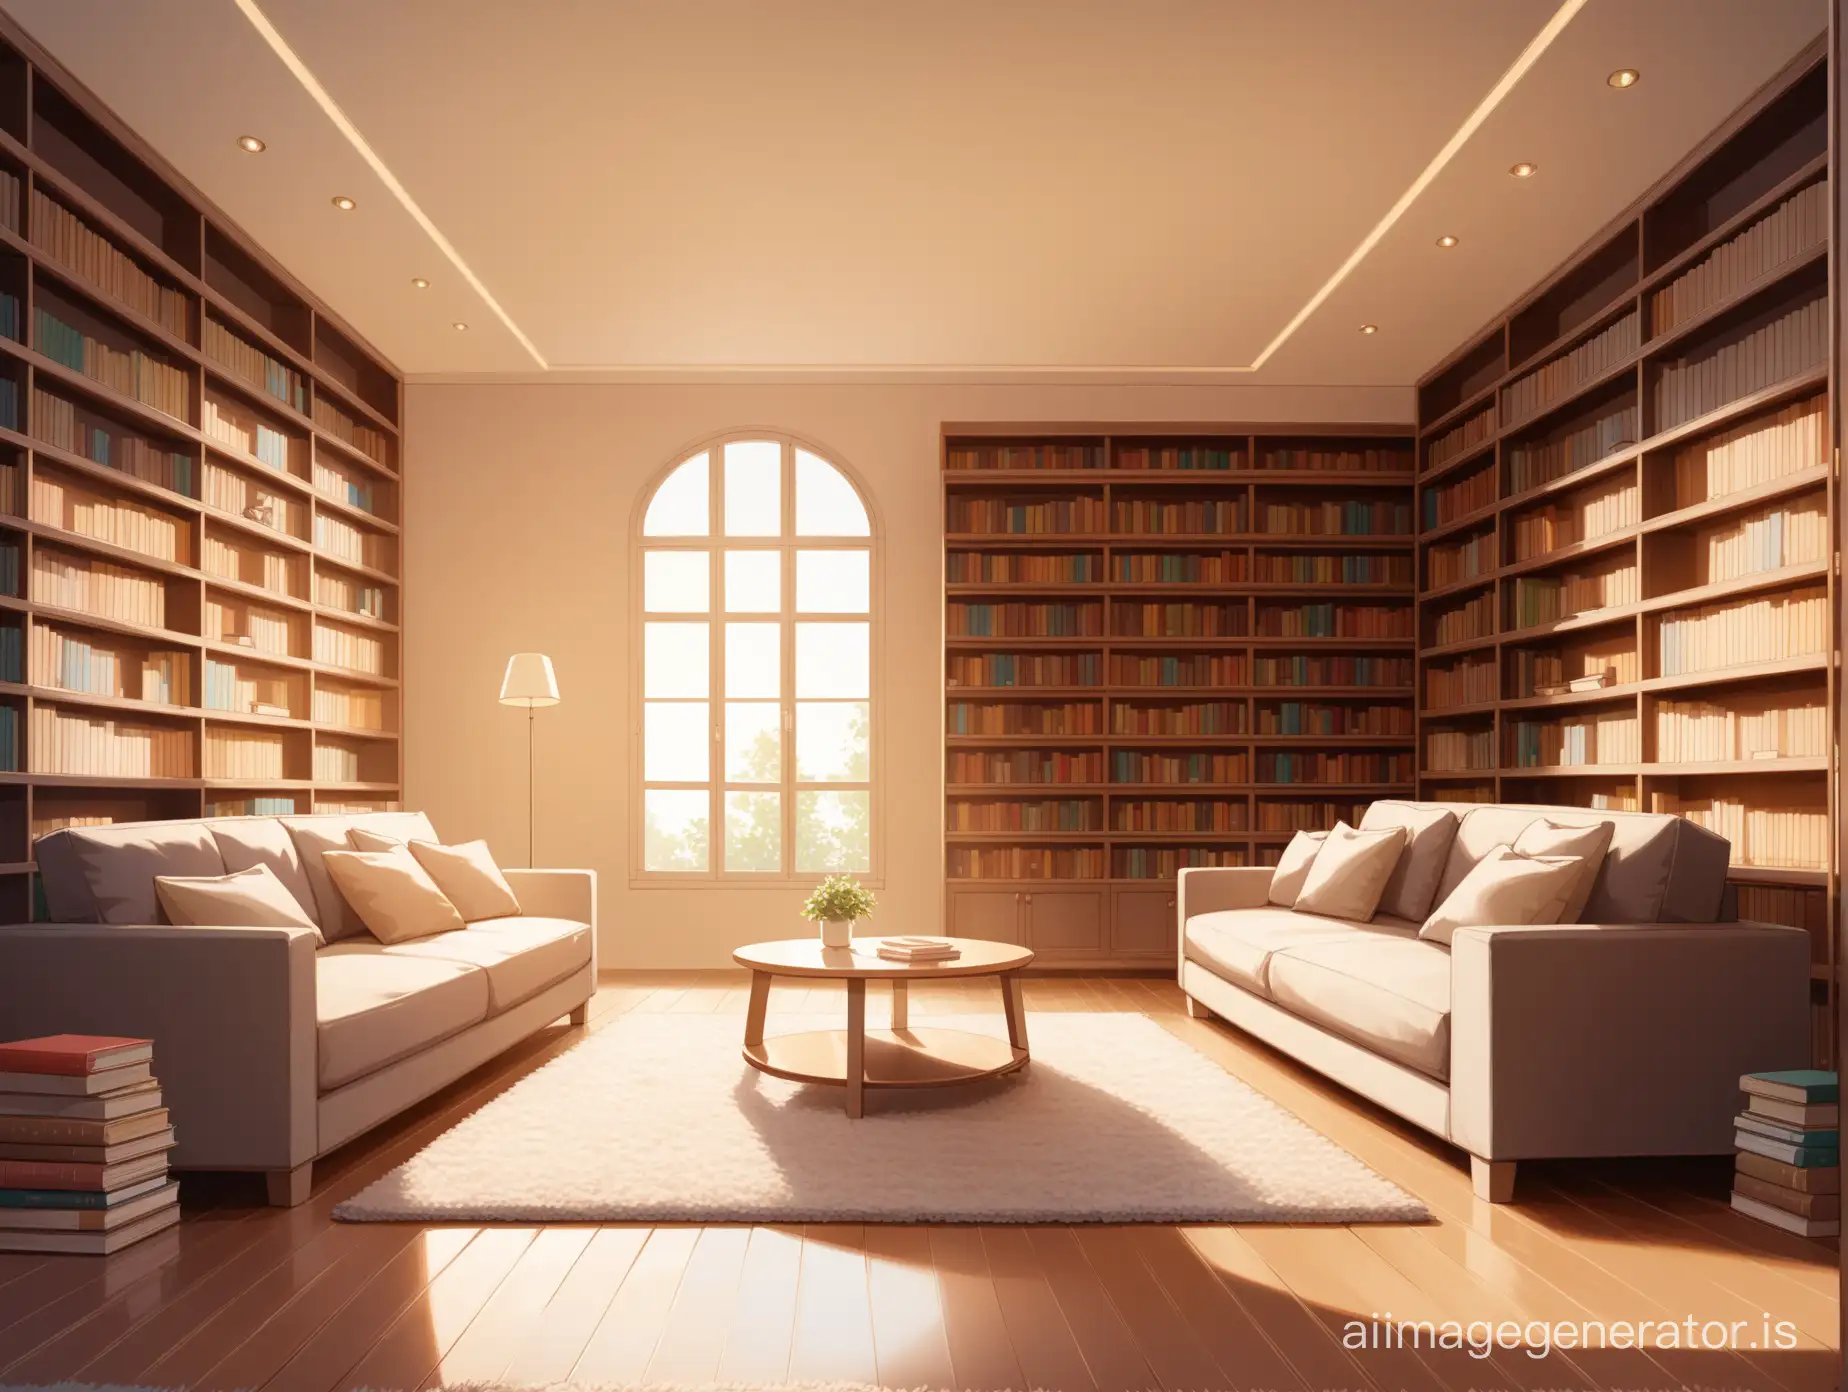 a cozy living room, the furniture and floor, a comfortable sofa with plush cushions, a bookshelf filled with books, decorative objects, vanishing point